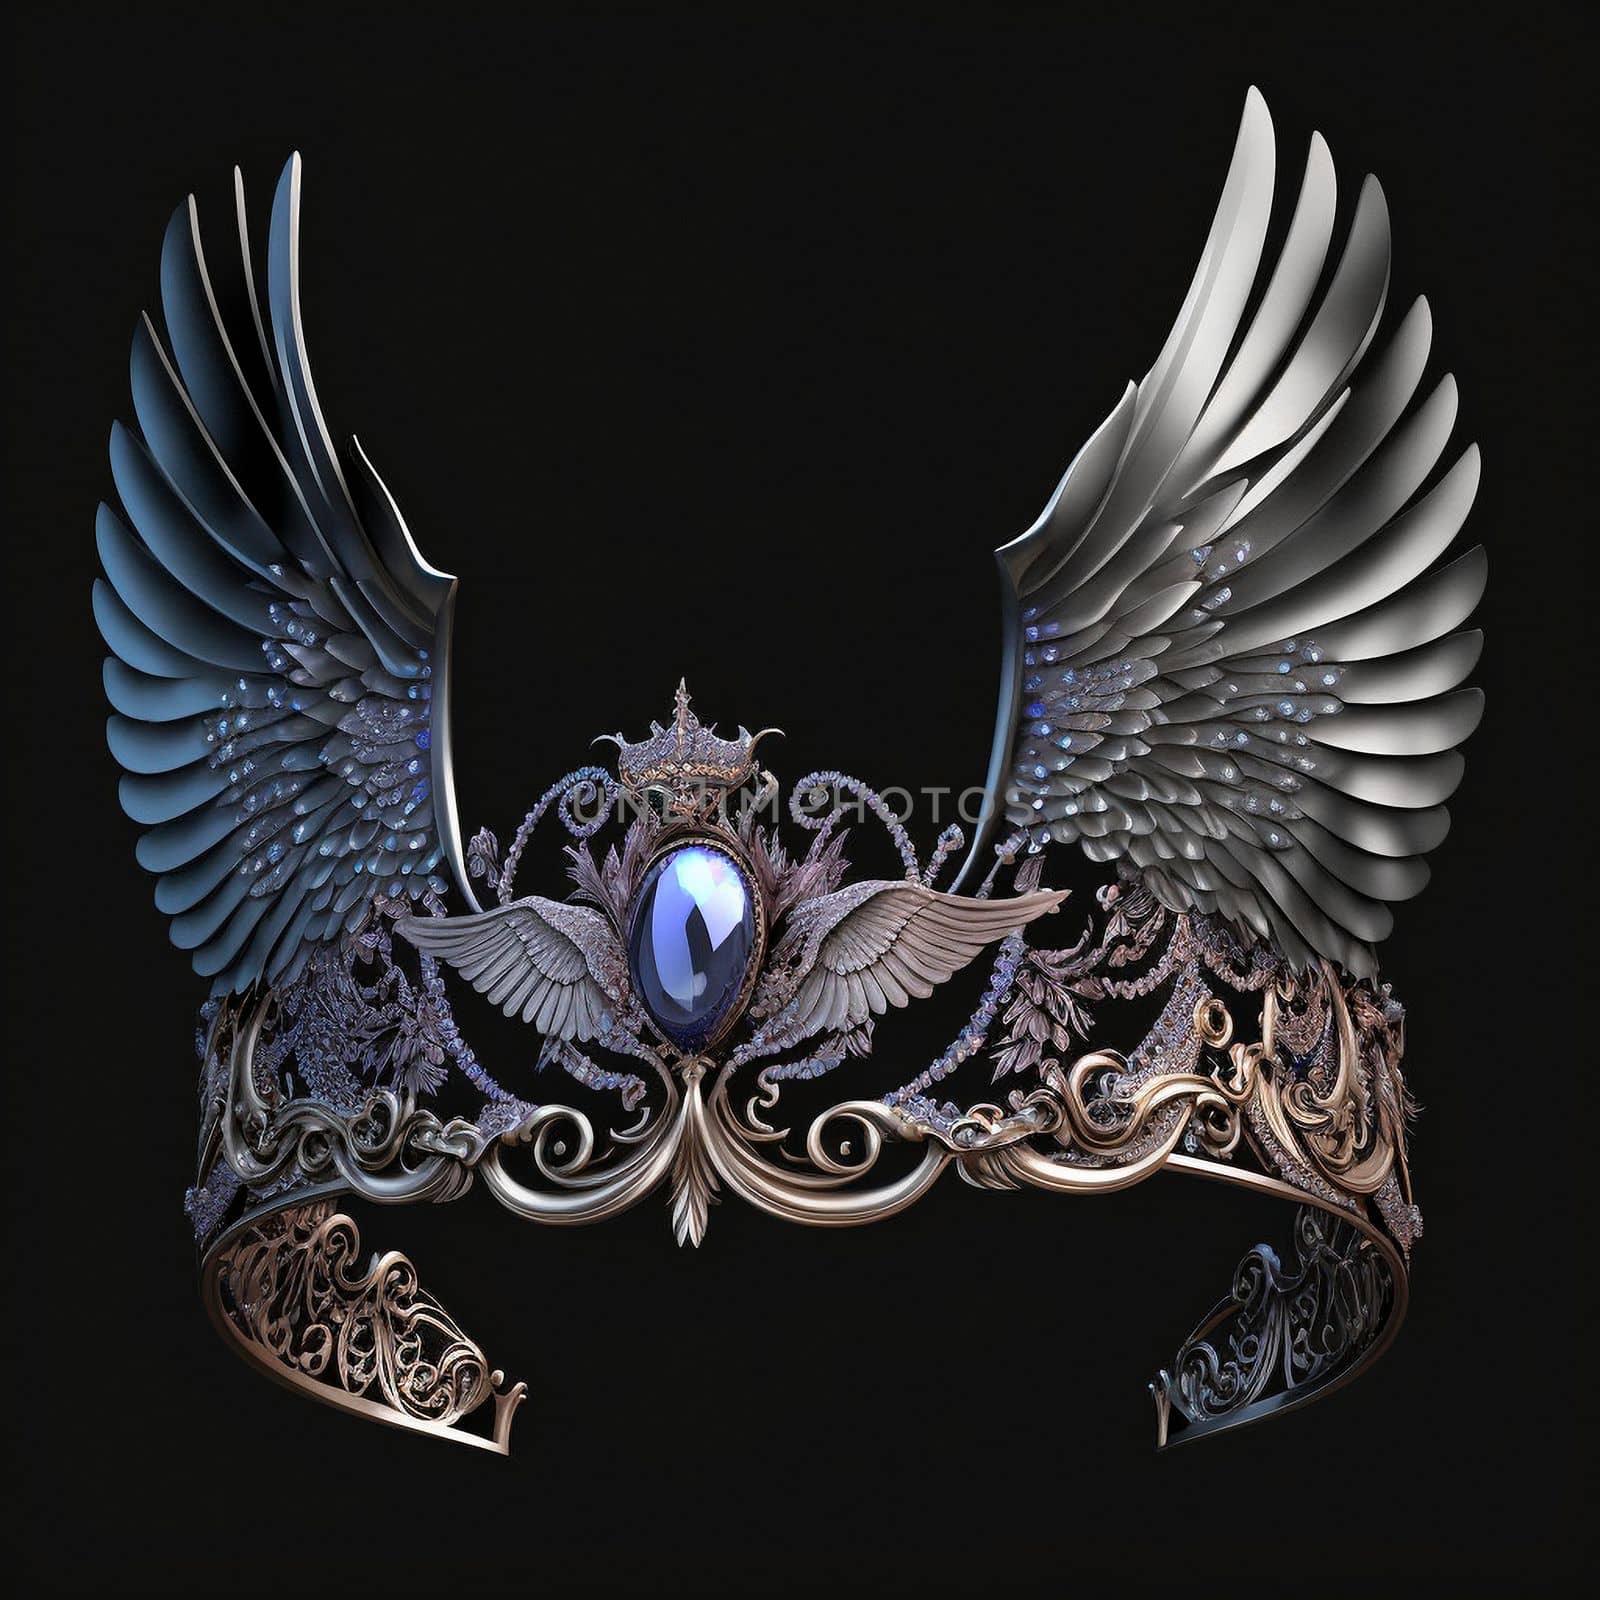 Tiara with wings. High quality illustration